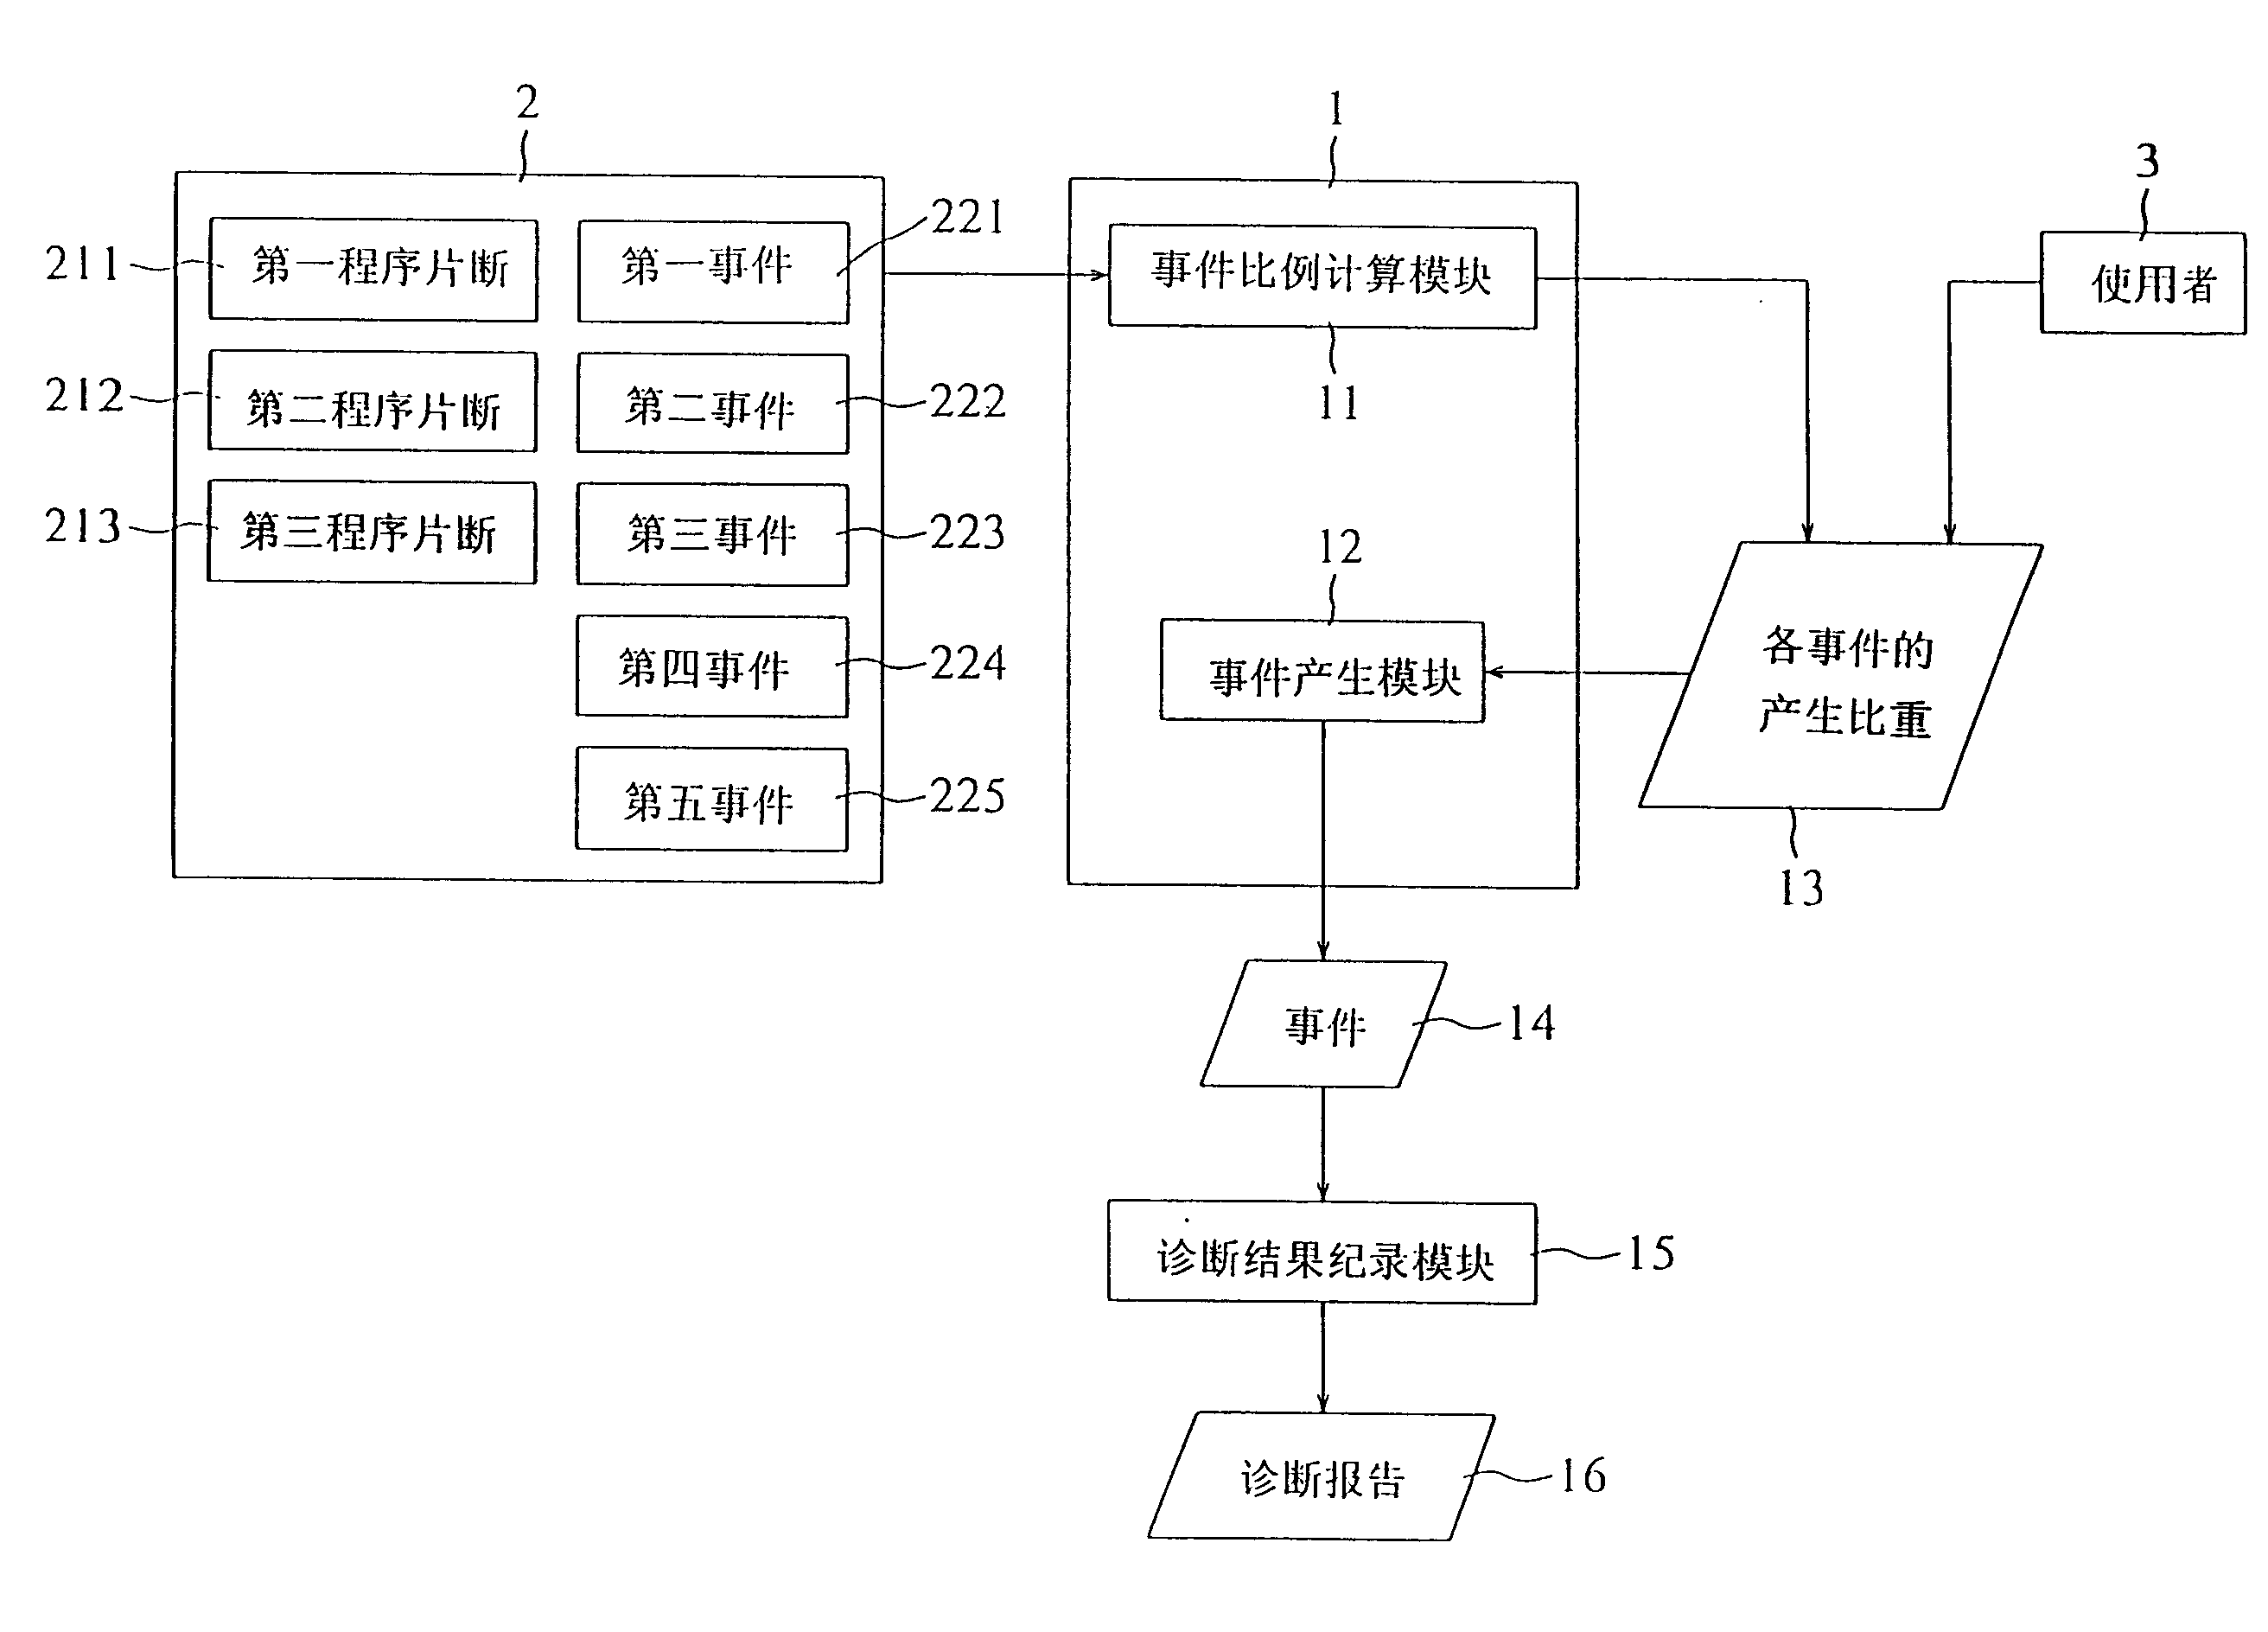 Software dianosing system and method